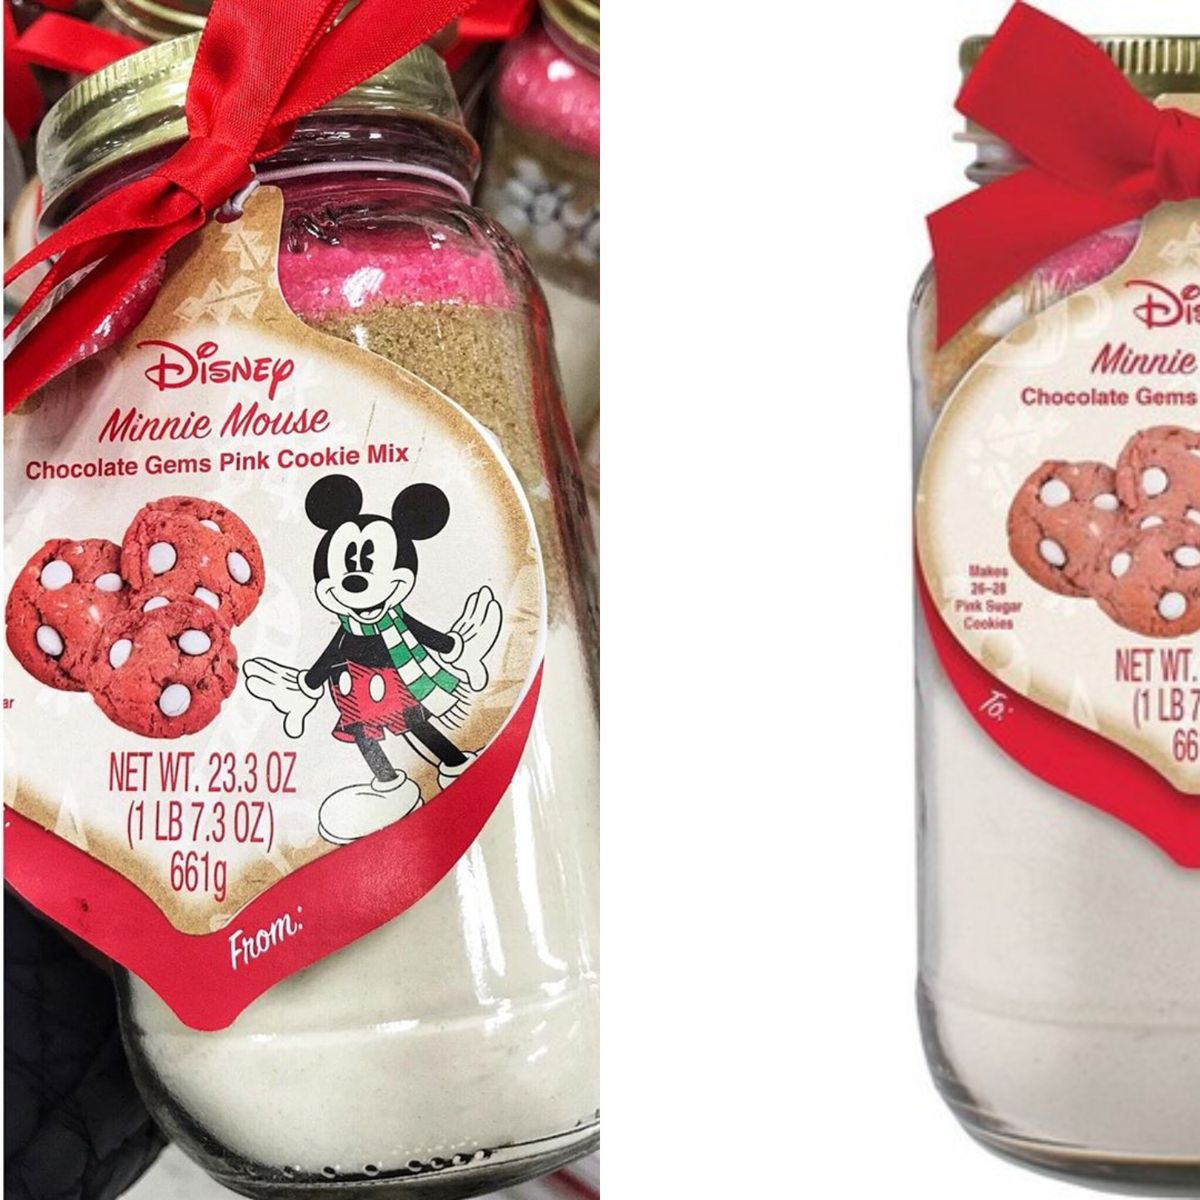 Disney Baking Set - Mickey Mouse and Friends Holiday Baking Set